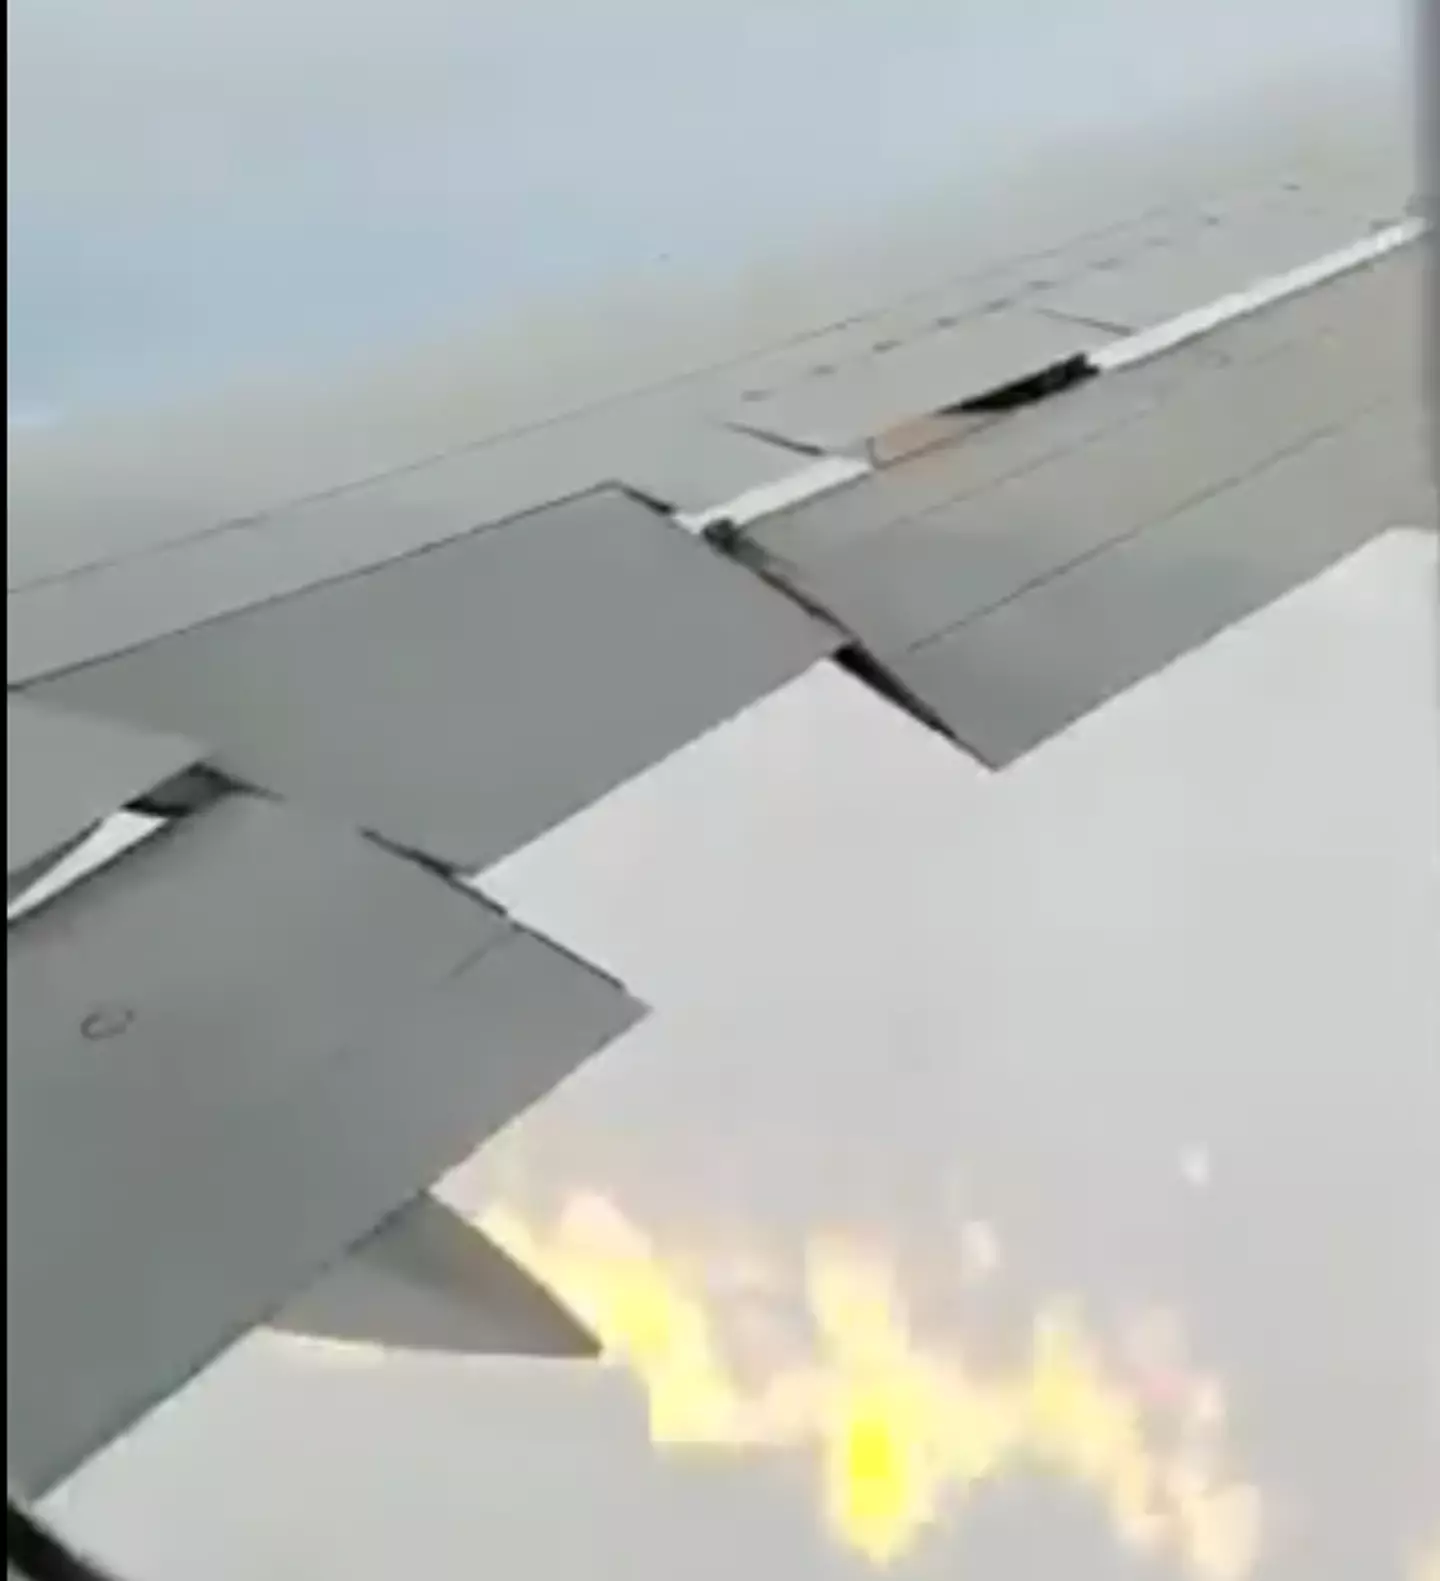 One of the plane's wings was engulfed in flames.